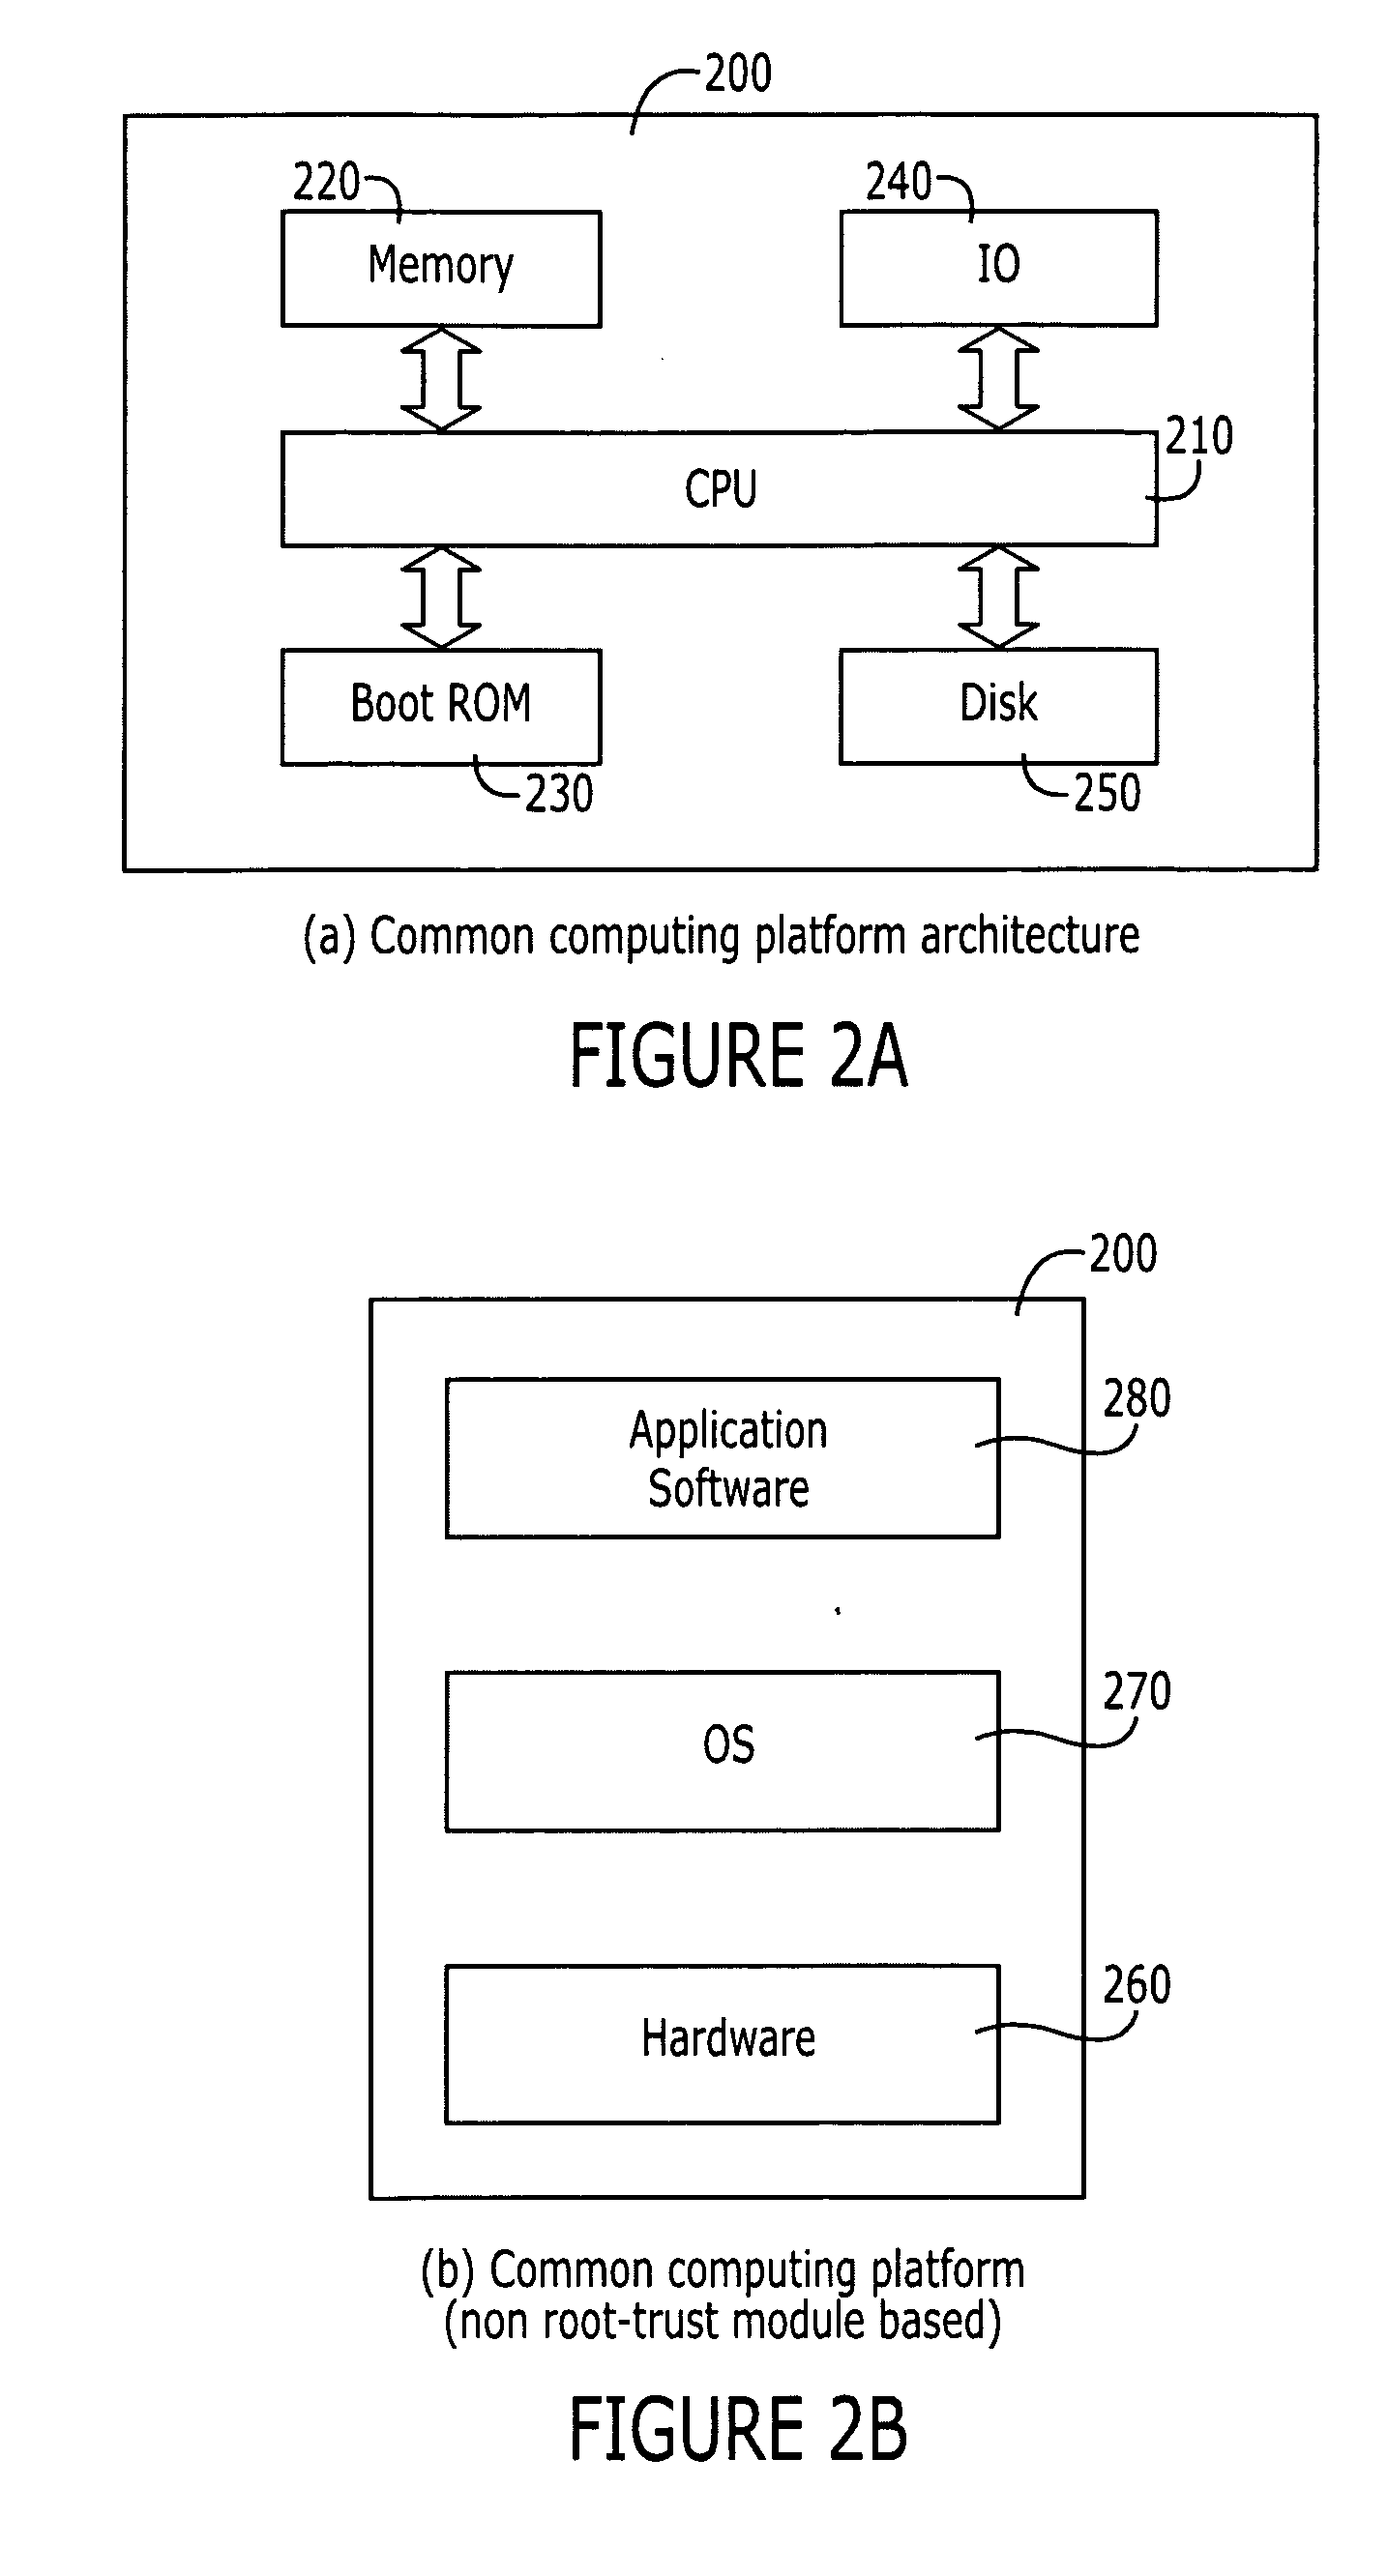 Virtual private network based on root-trust module computing platforms